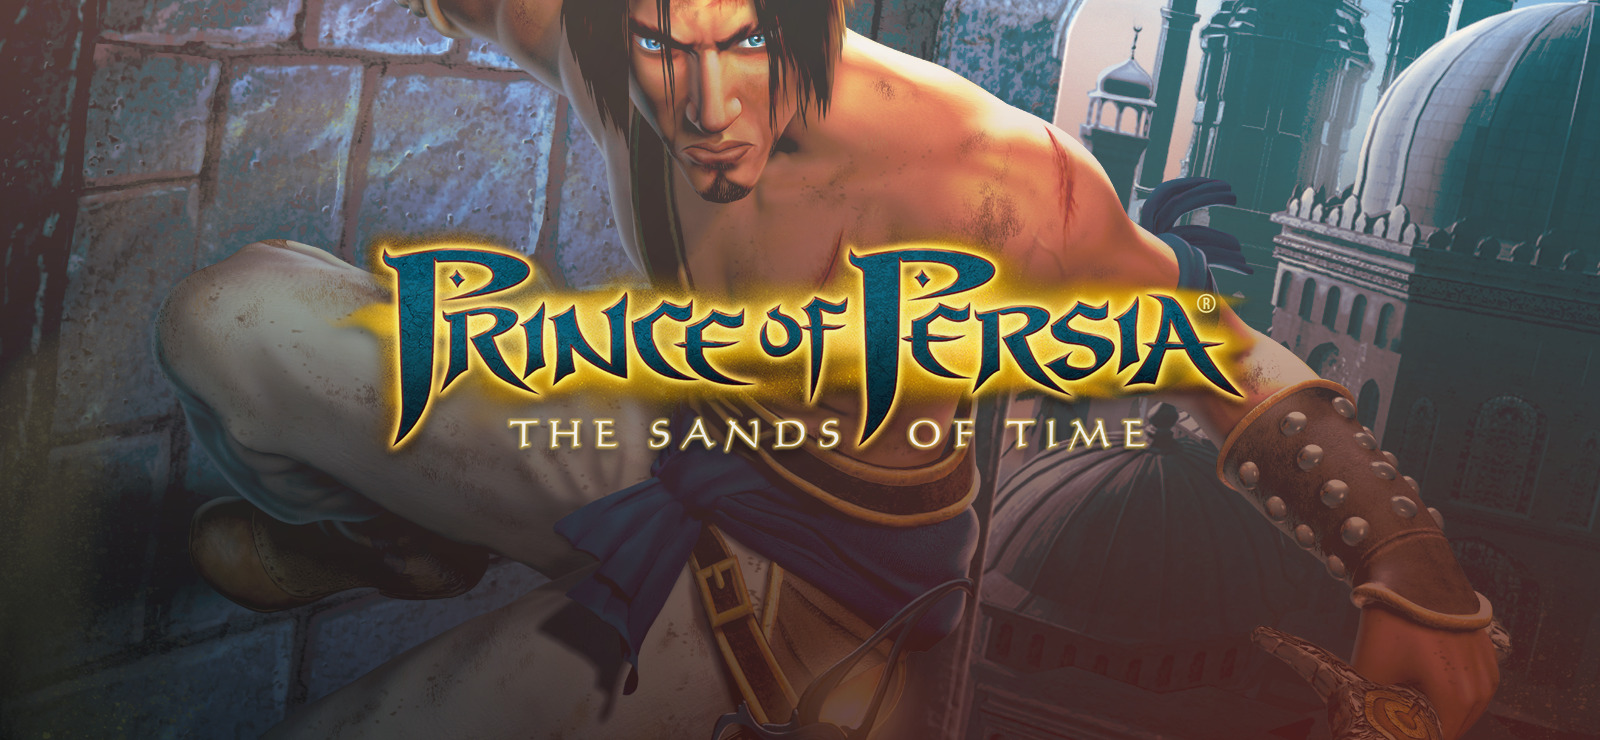 prince-of-persia-the-sands-of-time-free-download-gog-unlocked